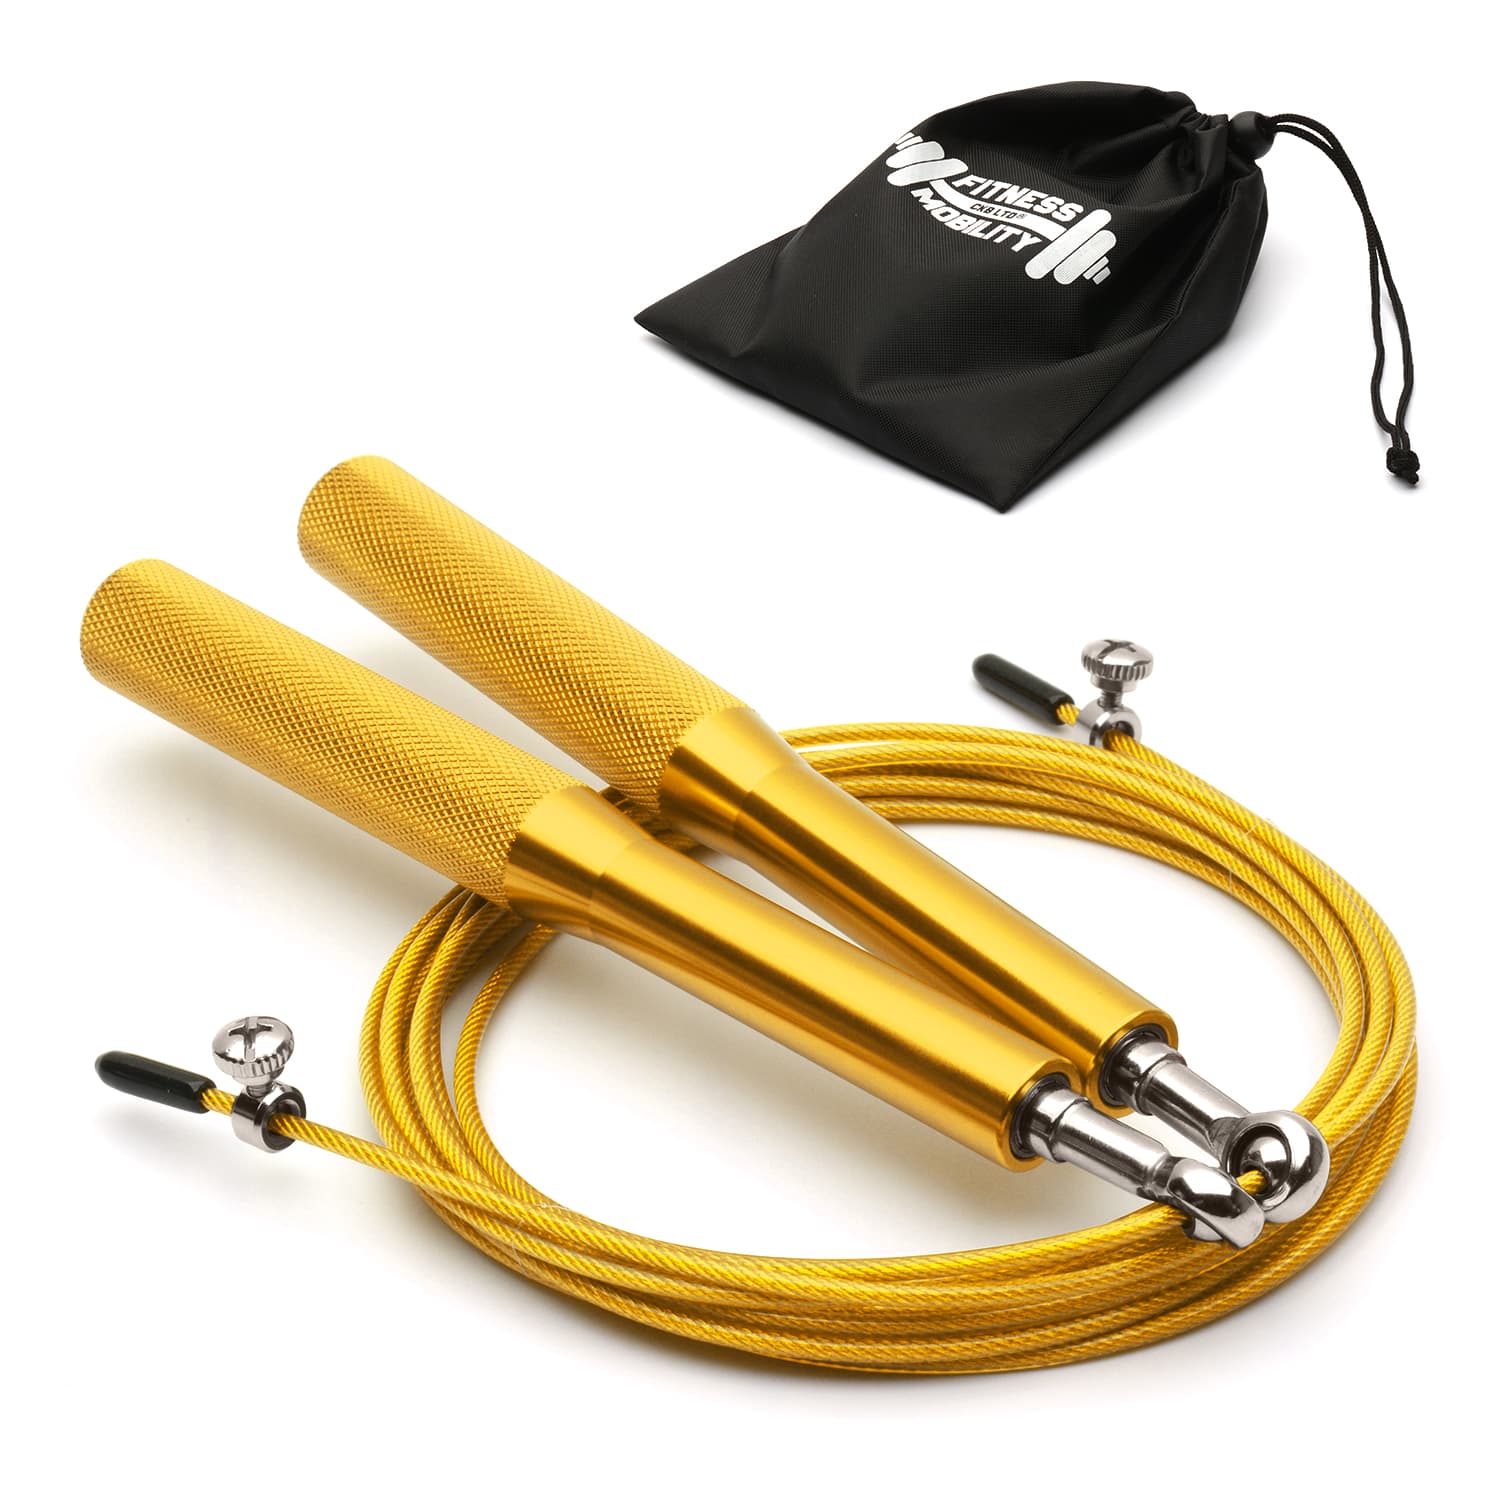 CKB Ltd Metal Adjustable 10ft (3m) Wire Skipping Rope with 360° Bearings – Gold